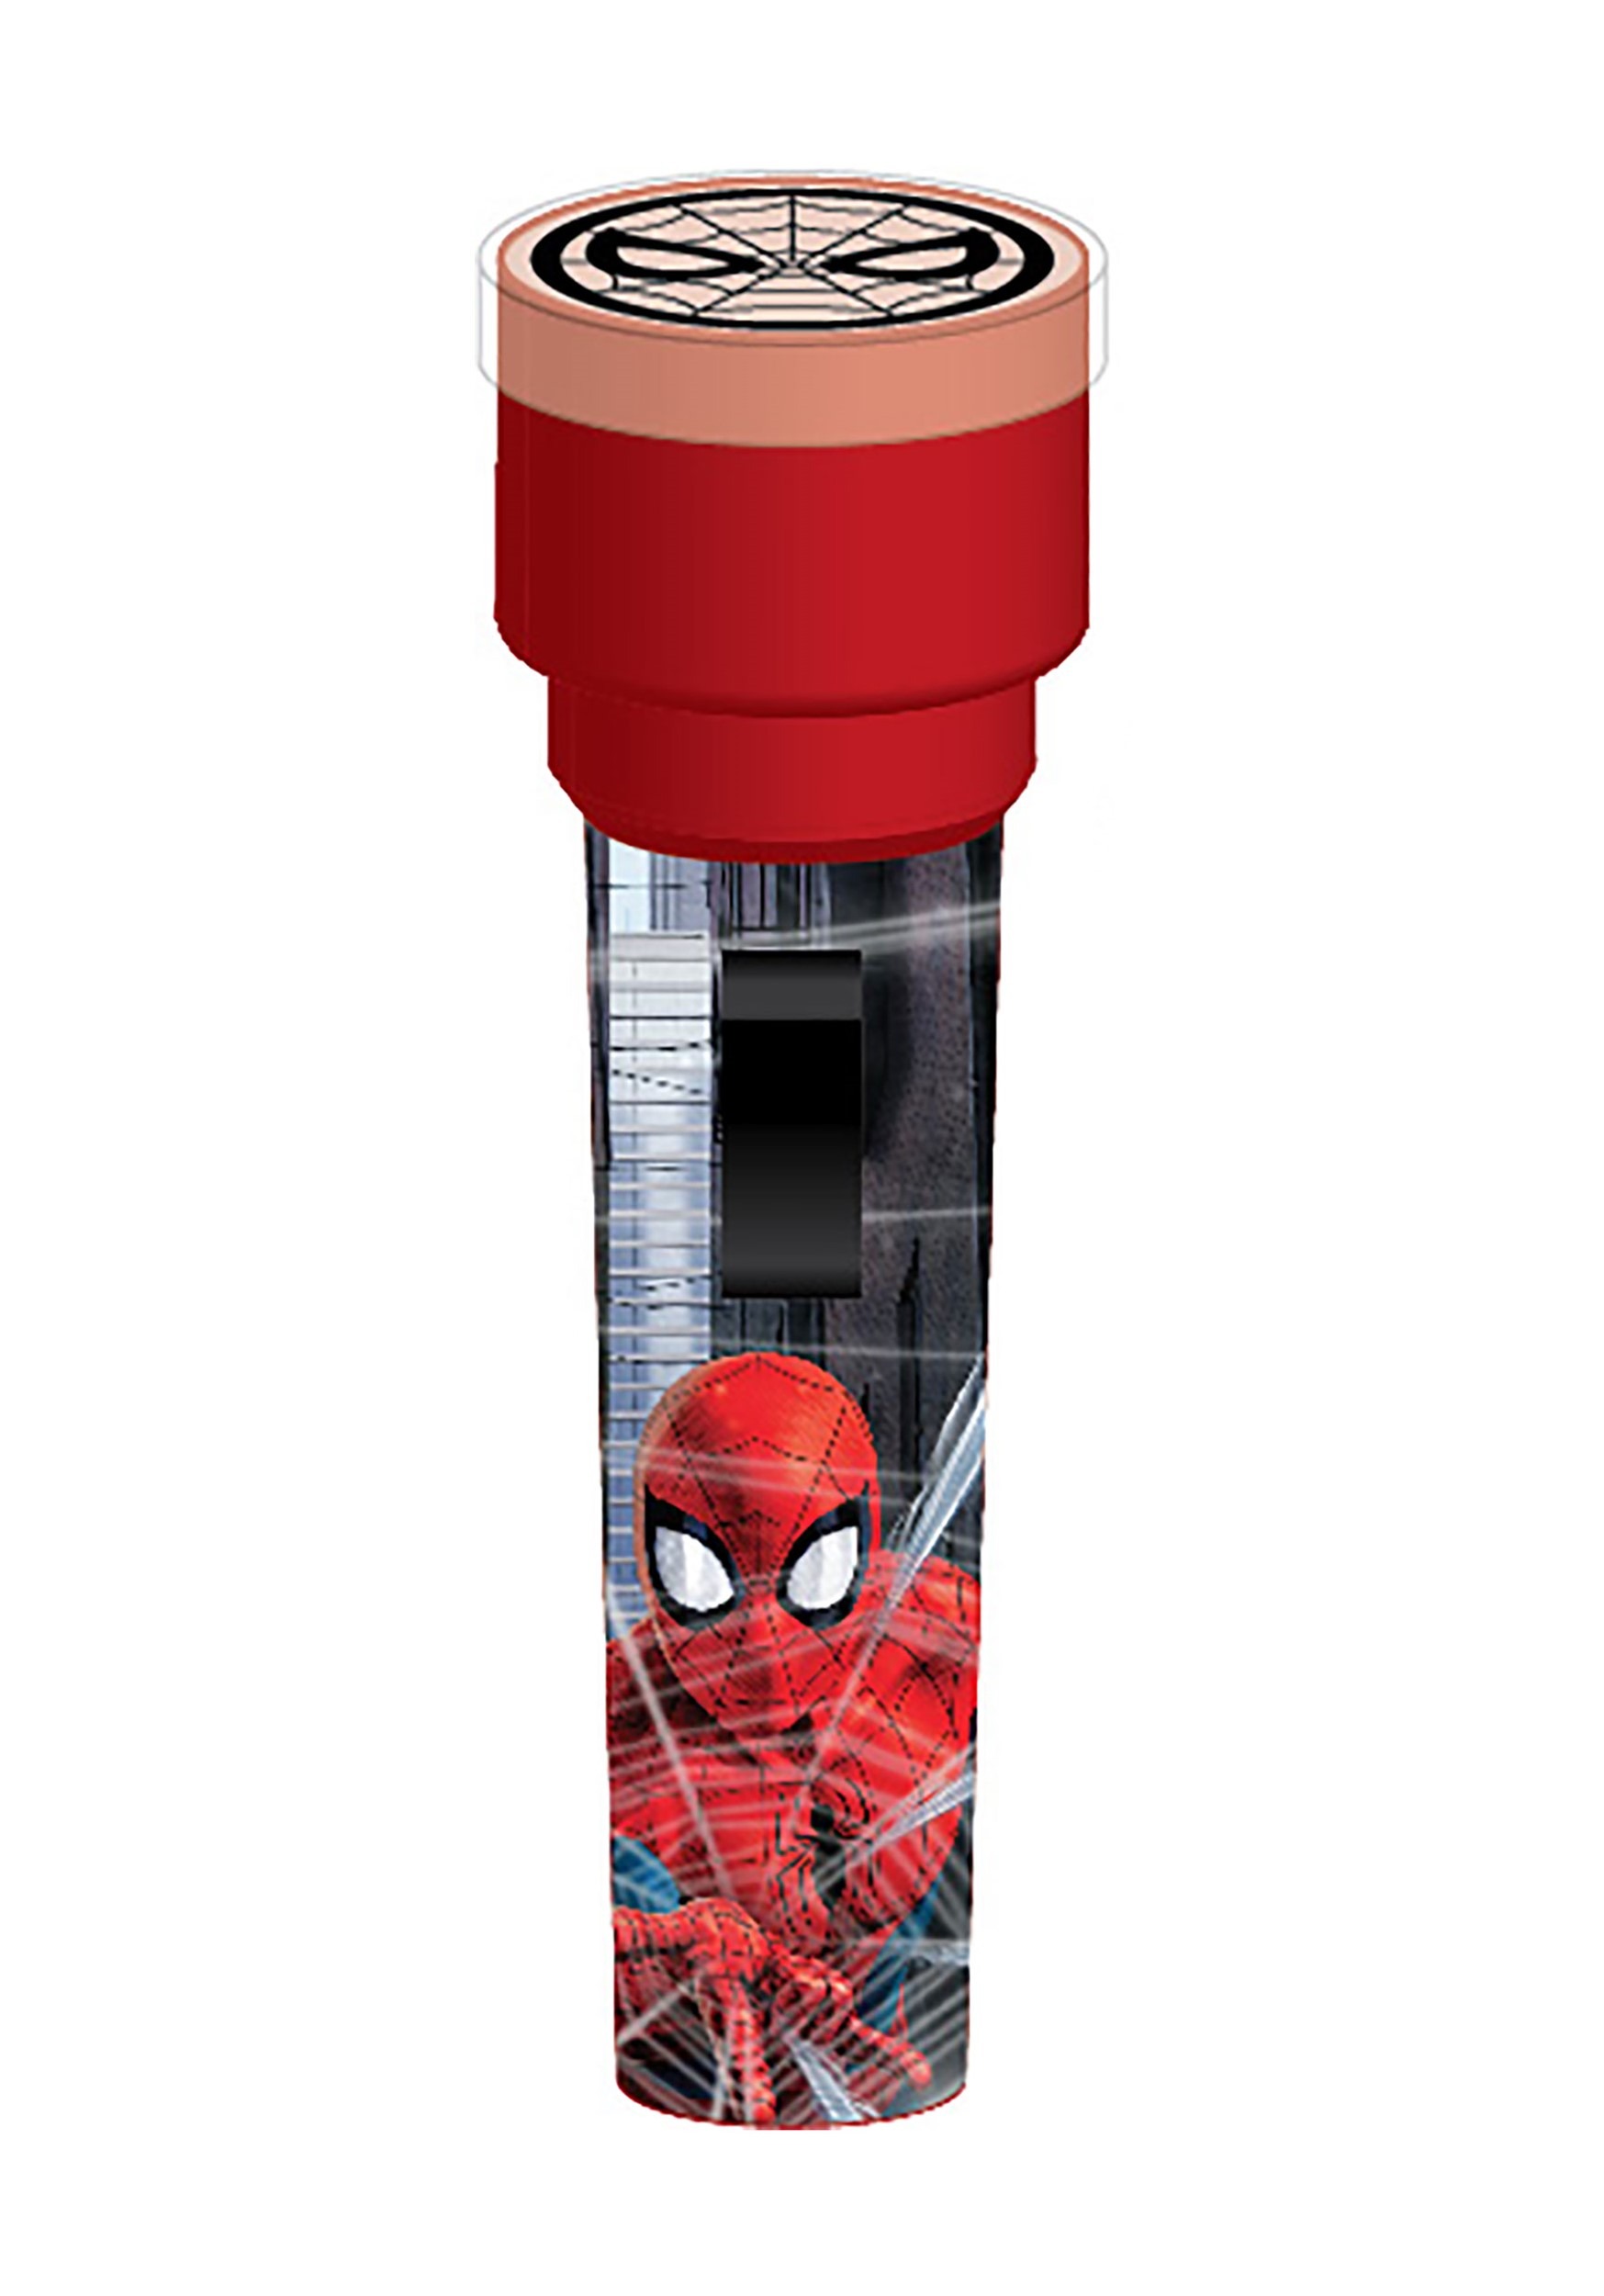 Marvel Spiderman Slideshow Projector Torch Includes 2 Discs 5 Years for sale online 